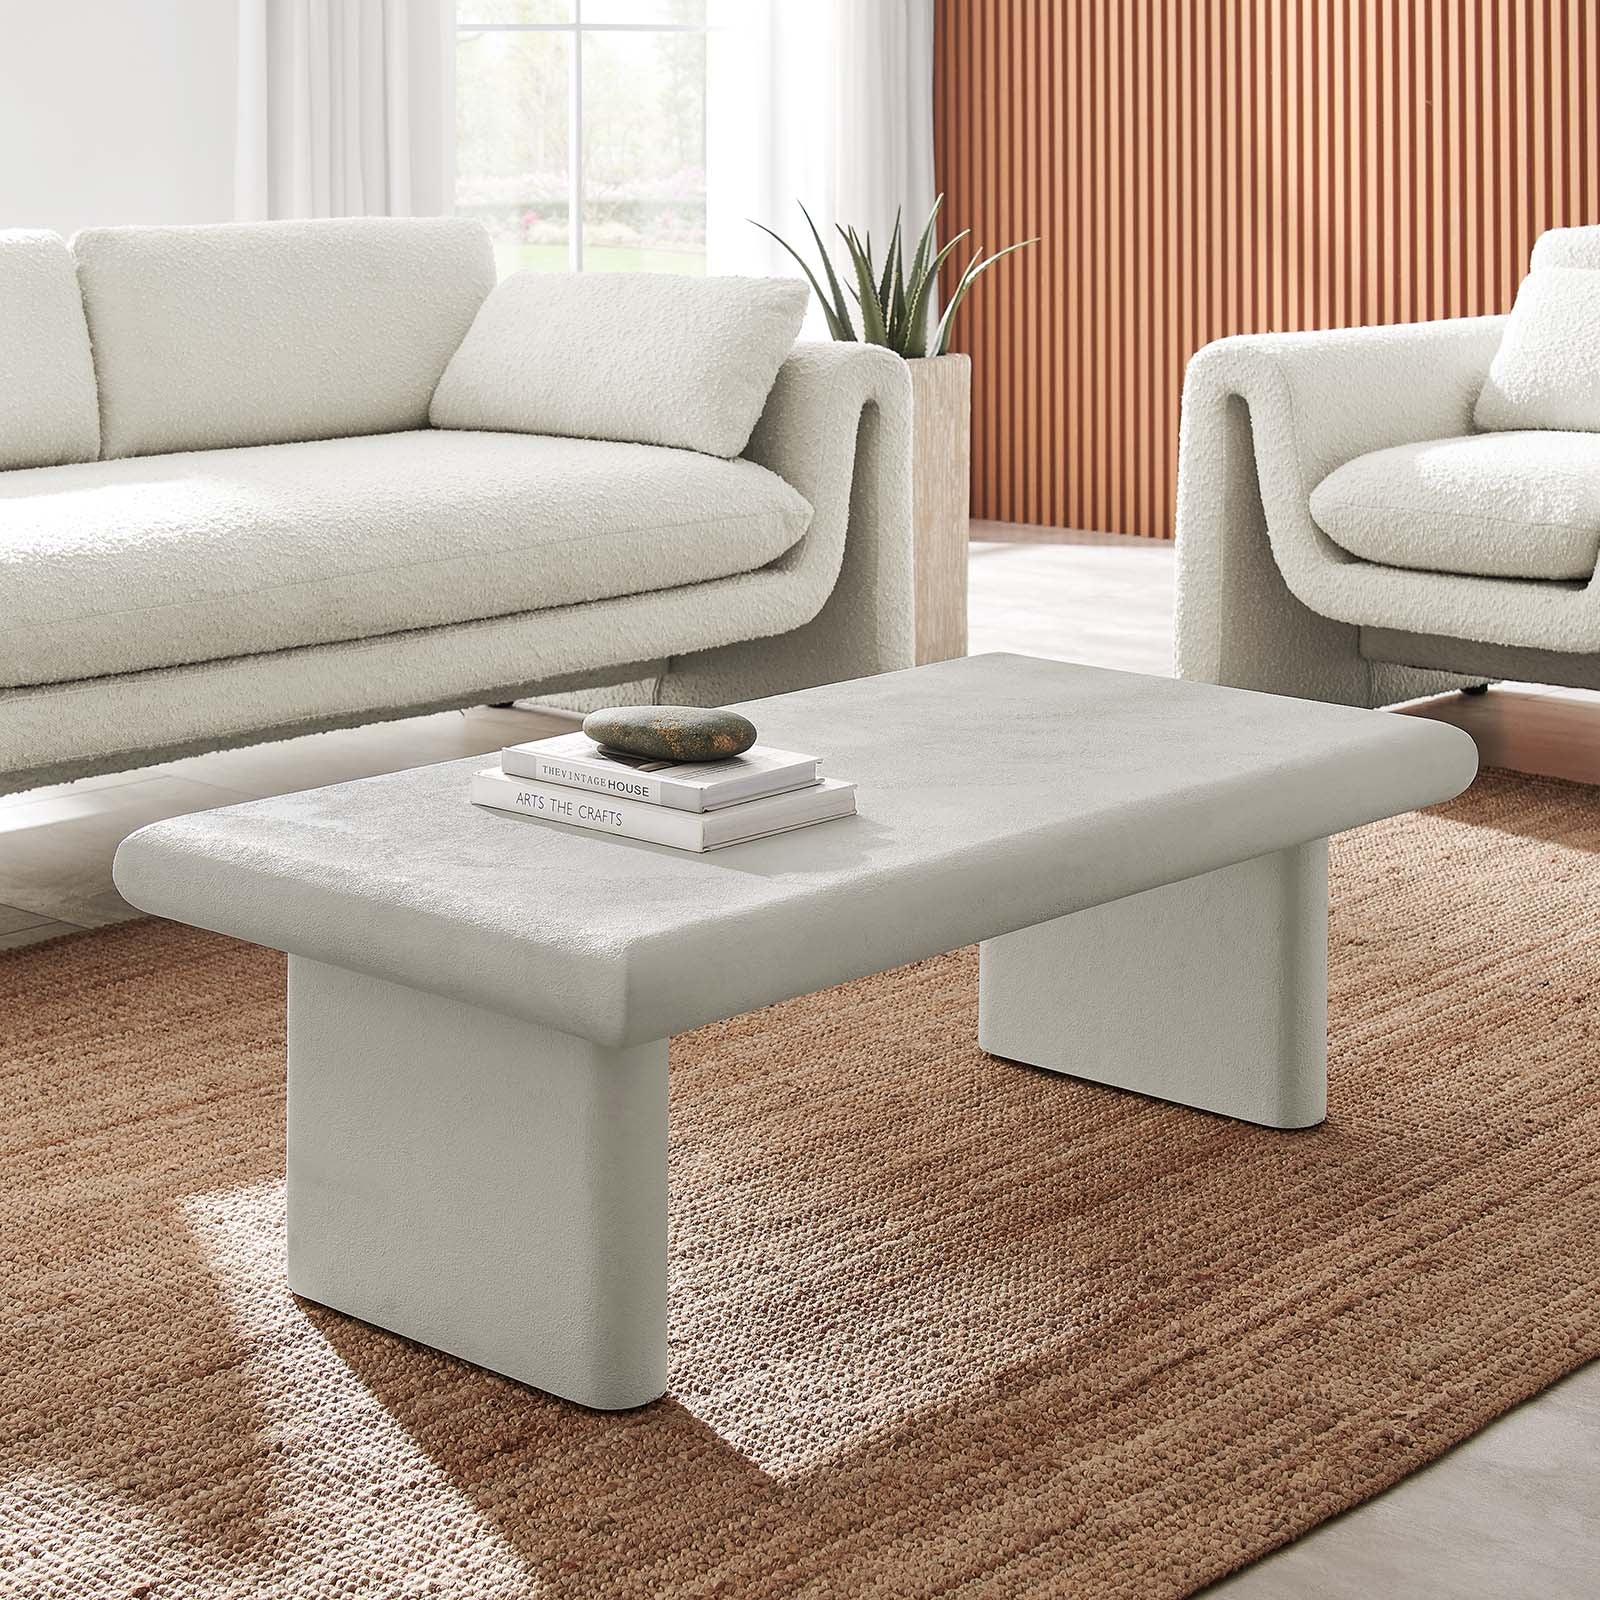 Relic Concrete Textured Coffee Table - East Shore Modern Home Furnishings